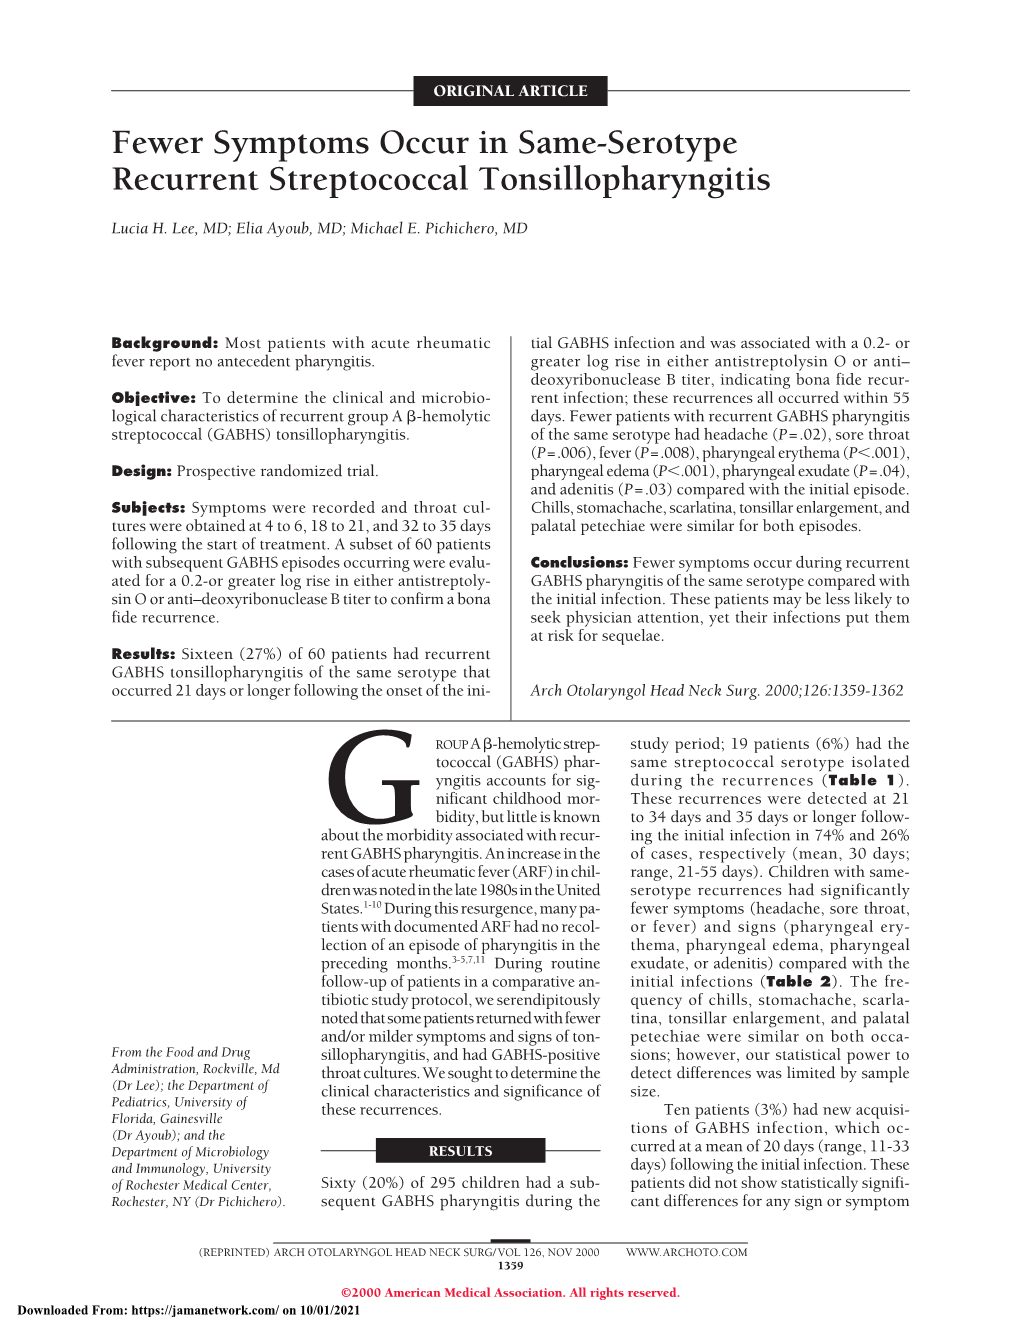 Fewer Symptoms Occur in Same-Serotype Recurrent Streptococcal Tonsillopharyngitis